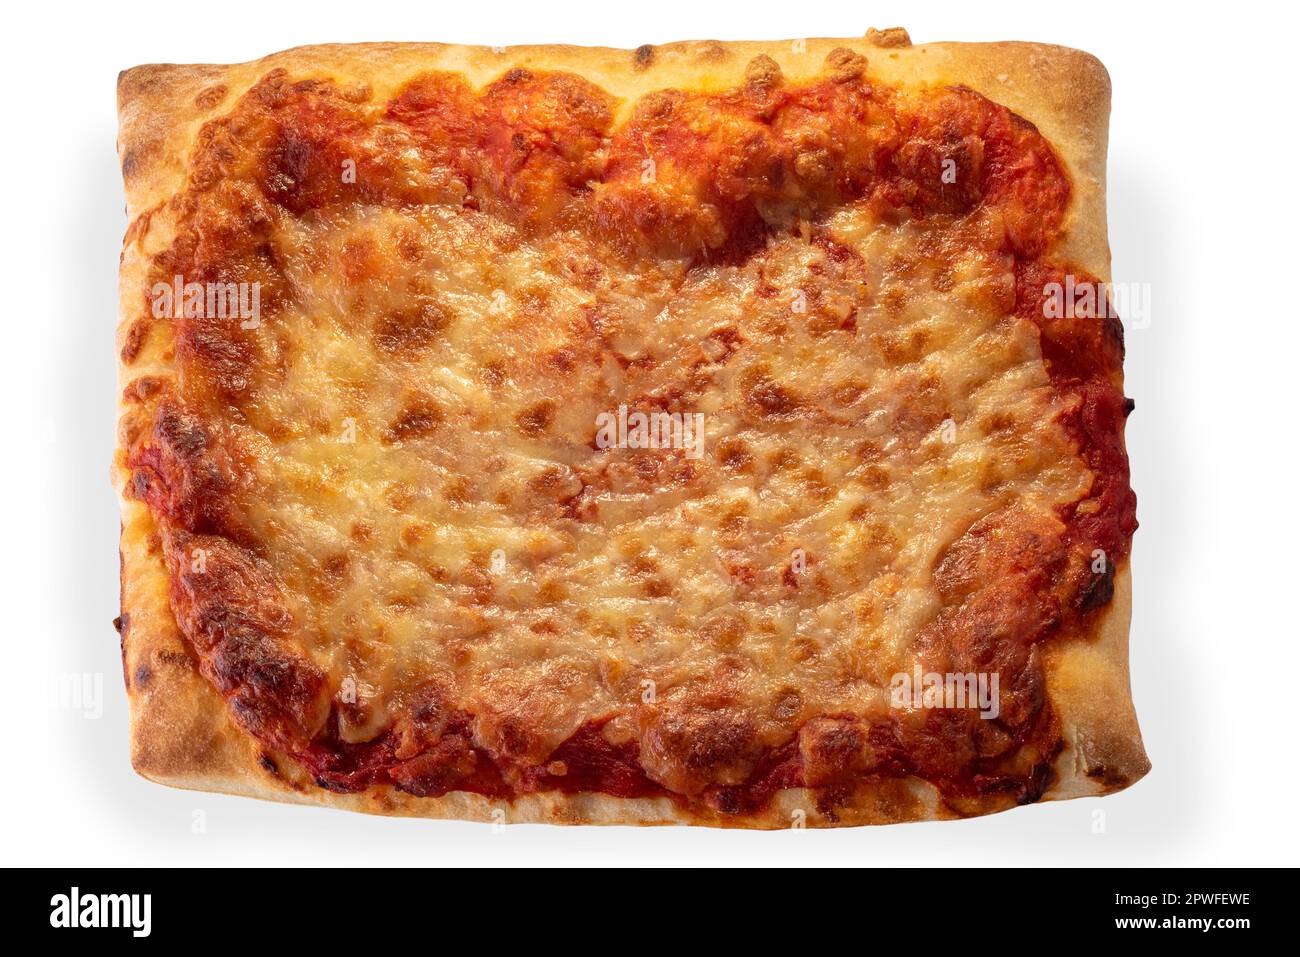 Square pizza with tomato and cheese in top view isolated on white with clipping path Stock Photo